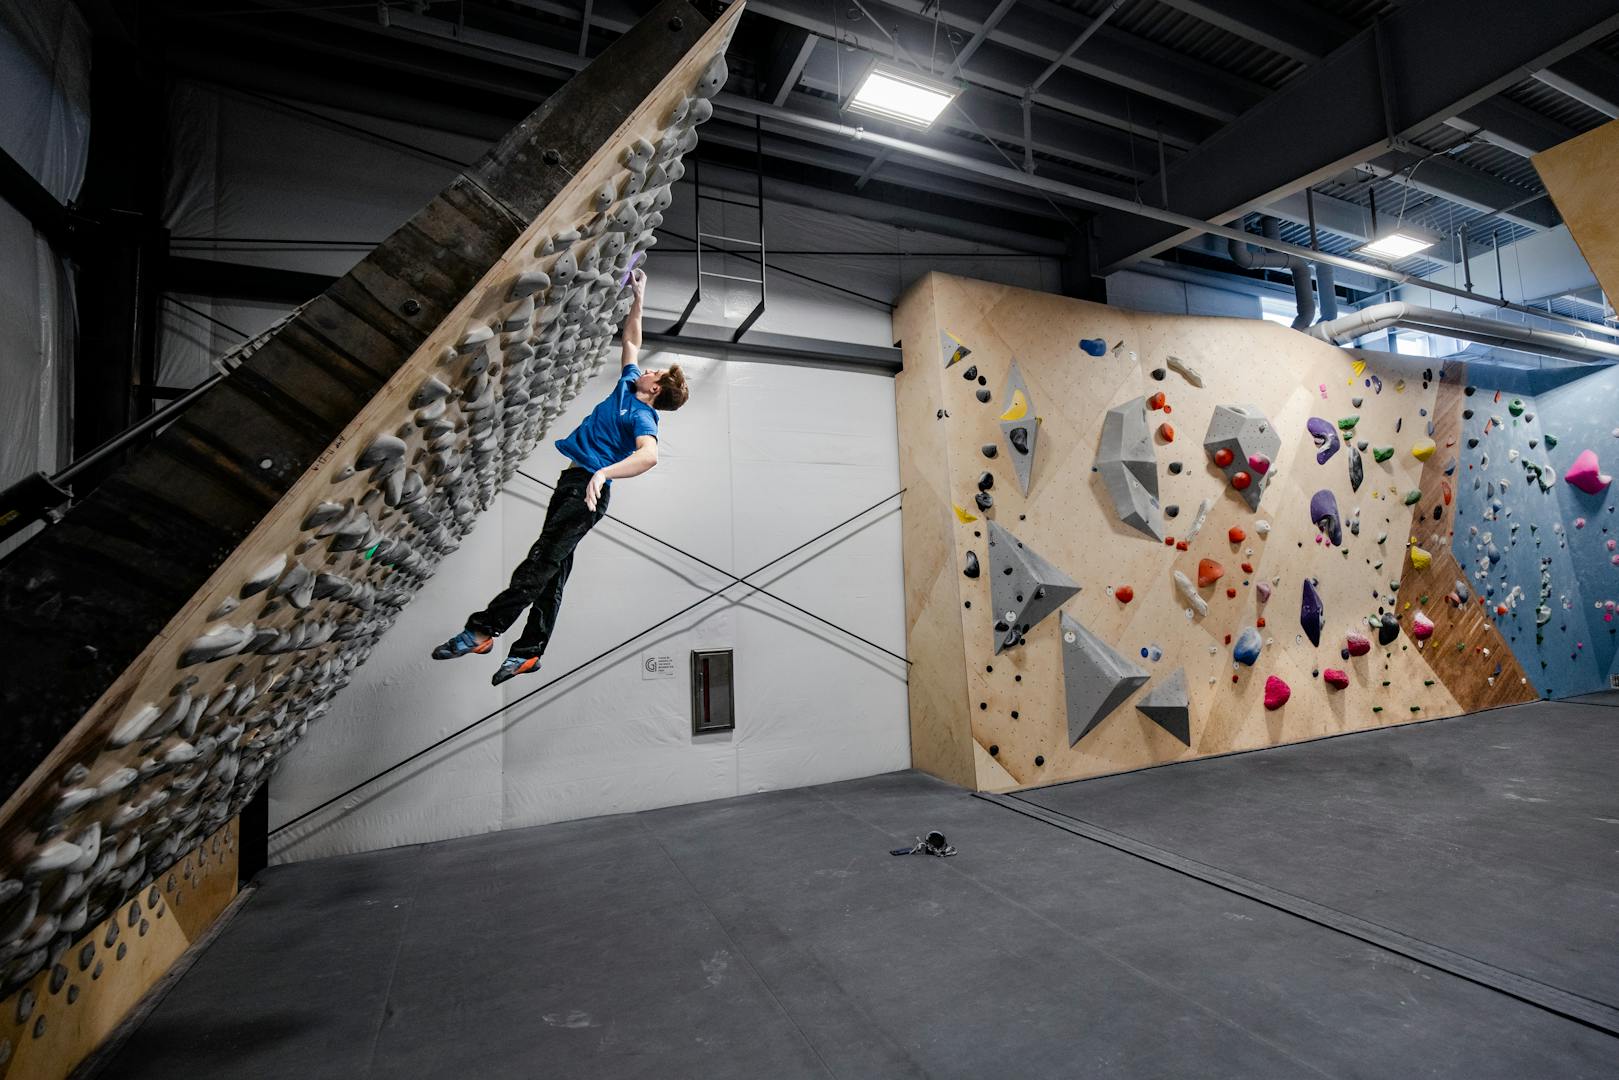 BD Athlete Colin Duffy climbing indoors